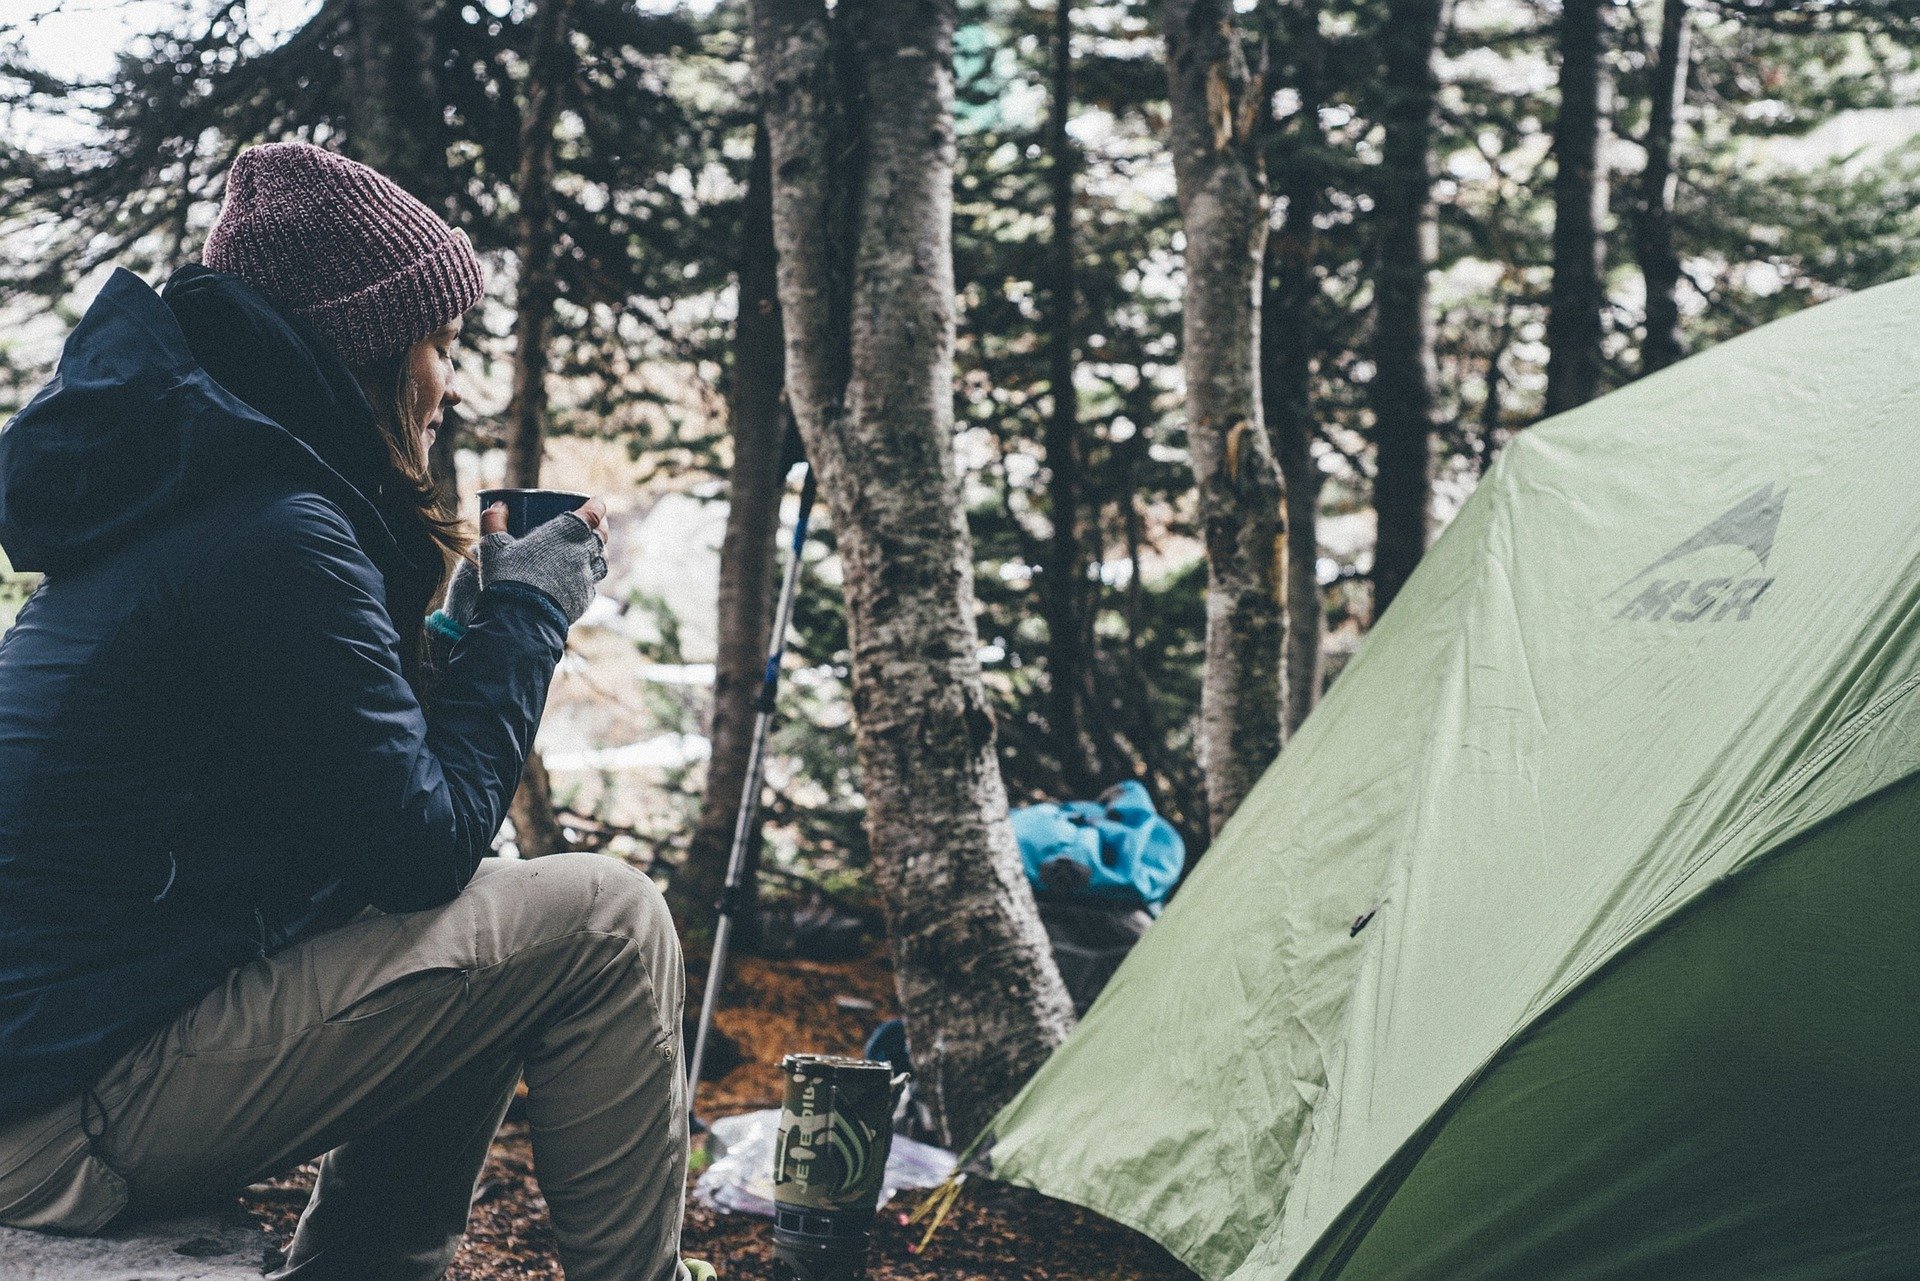 List of Essential Clothing to Pack and Equipment Checklist for a  Camping Trip